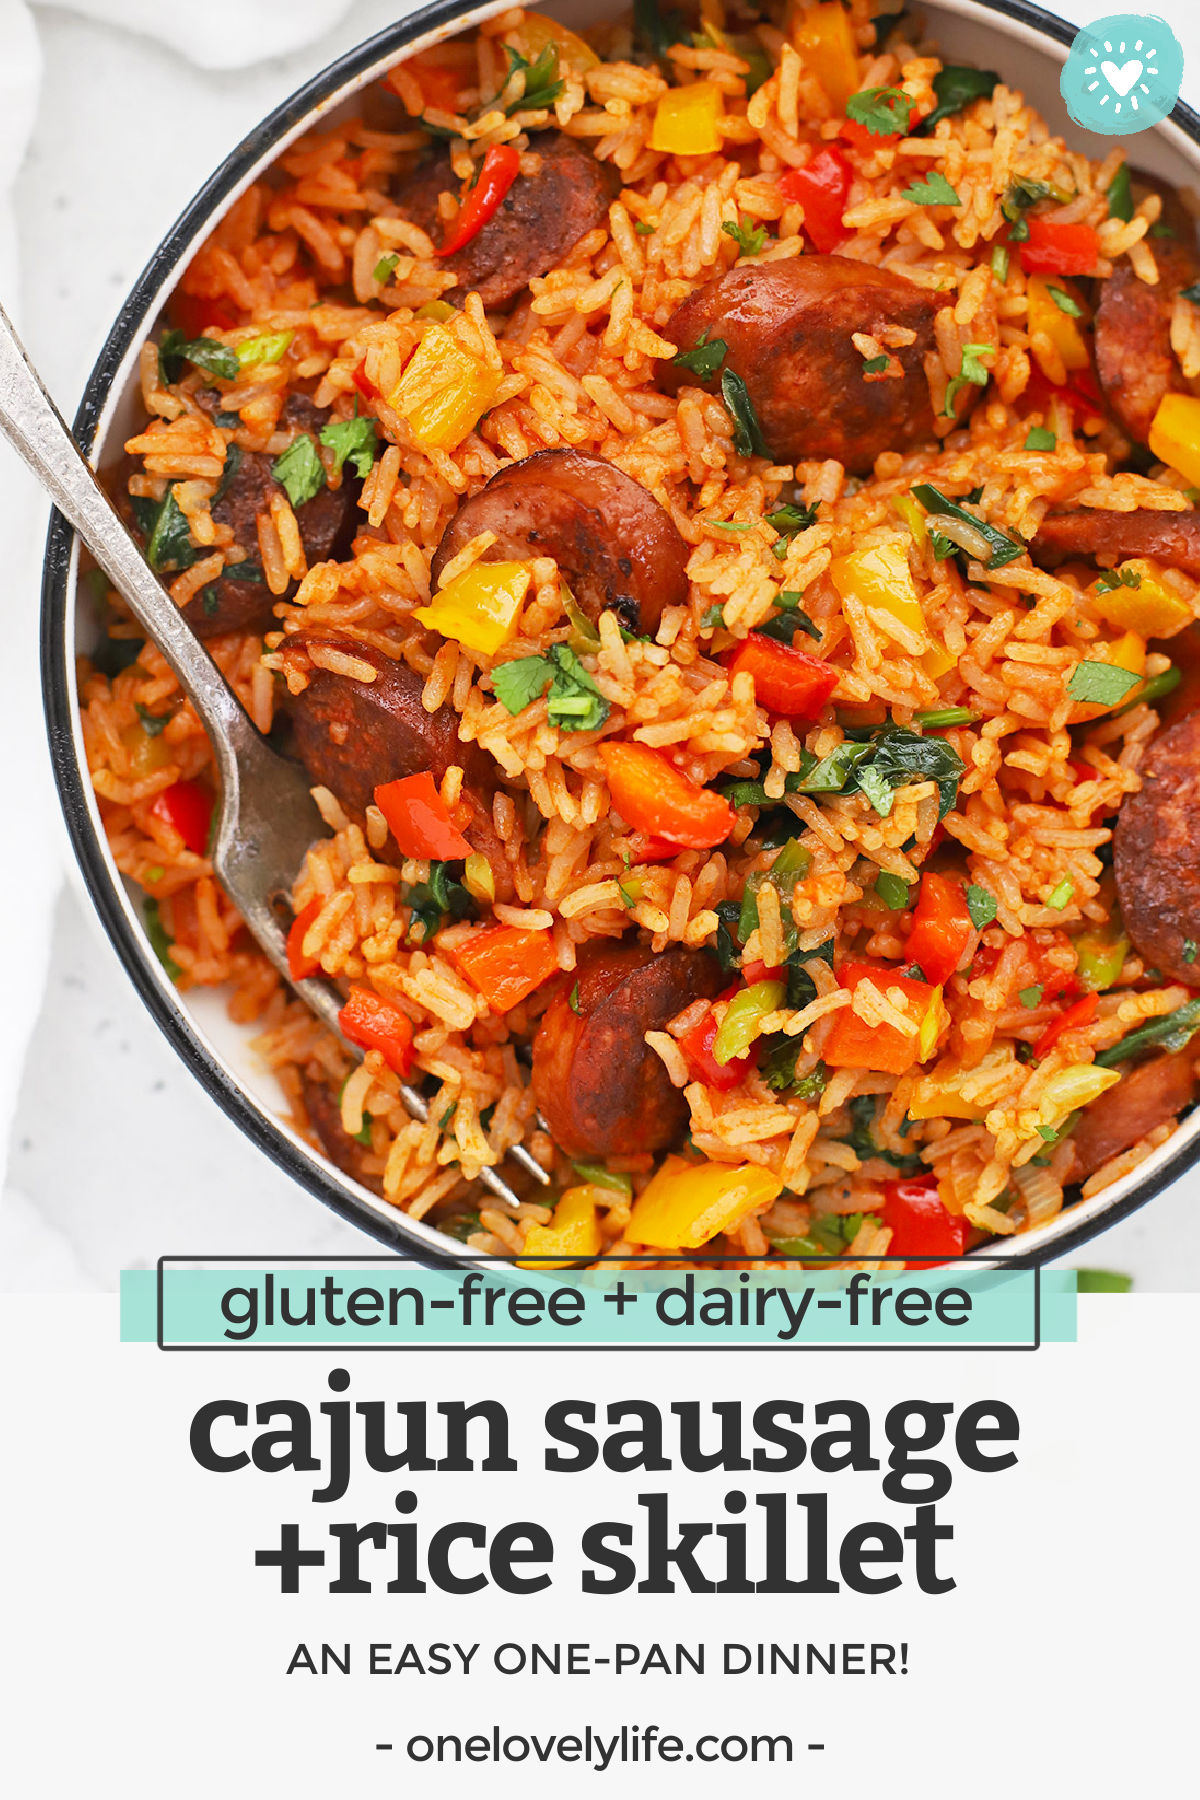 Cajun Sausage and Rice Skillet - This easy one pan dinner comes together in a flash, but packs some serious flavor! A family-friendly dinner that's easy enough to make any night of the week! (Gluten-Free, Dairy-Free) // One-Pan Dinner // Easy Dinner // Cajun Rice // Gluten-Free Dinner #glutenfree #easydinner #rice #onepan #skillet